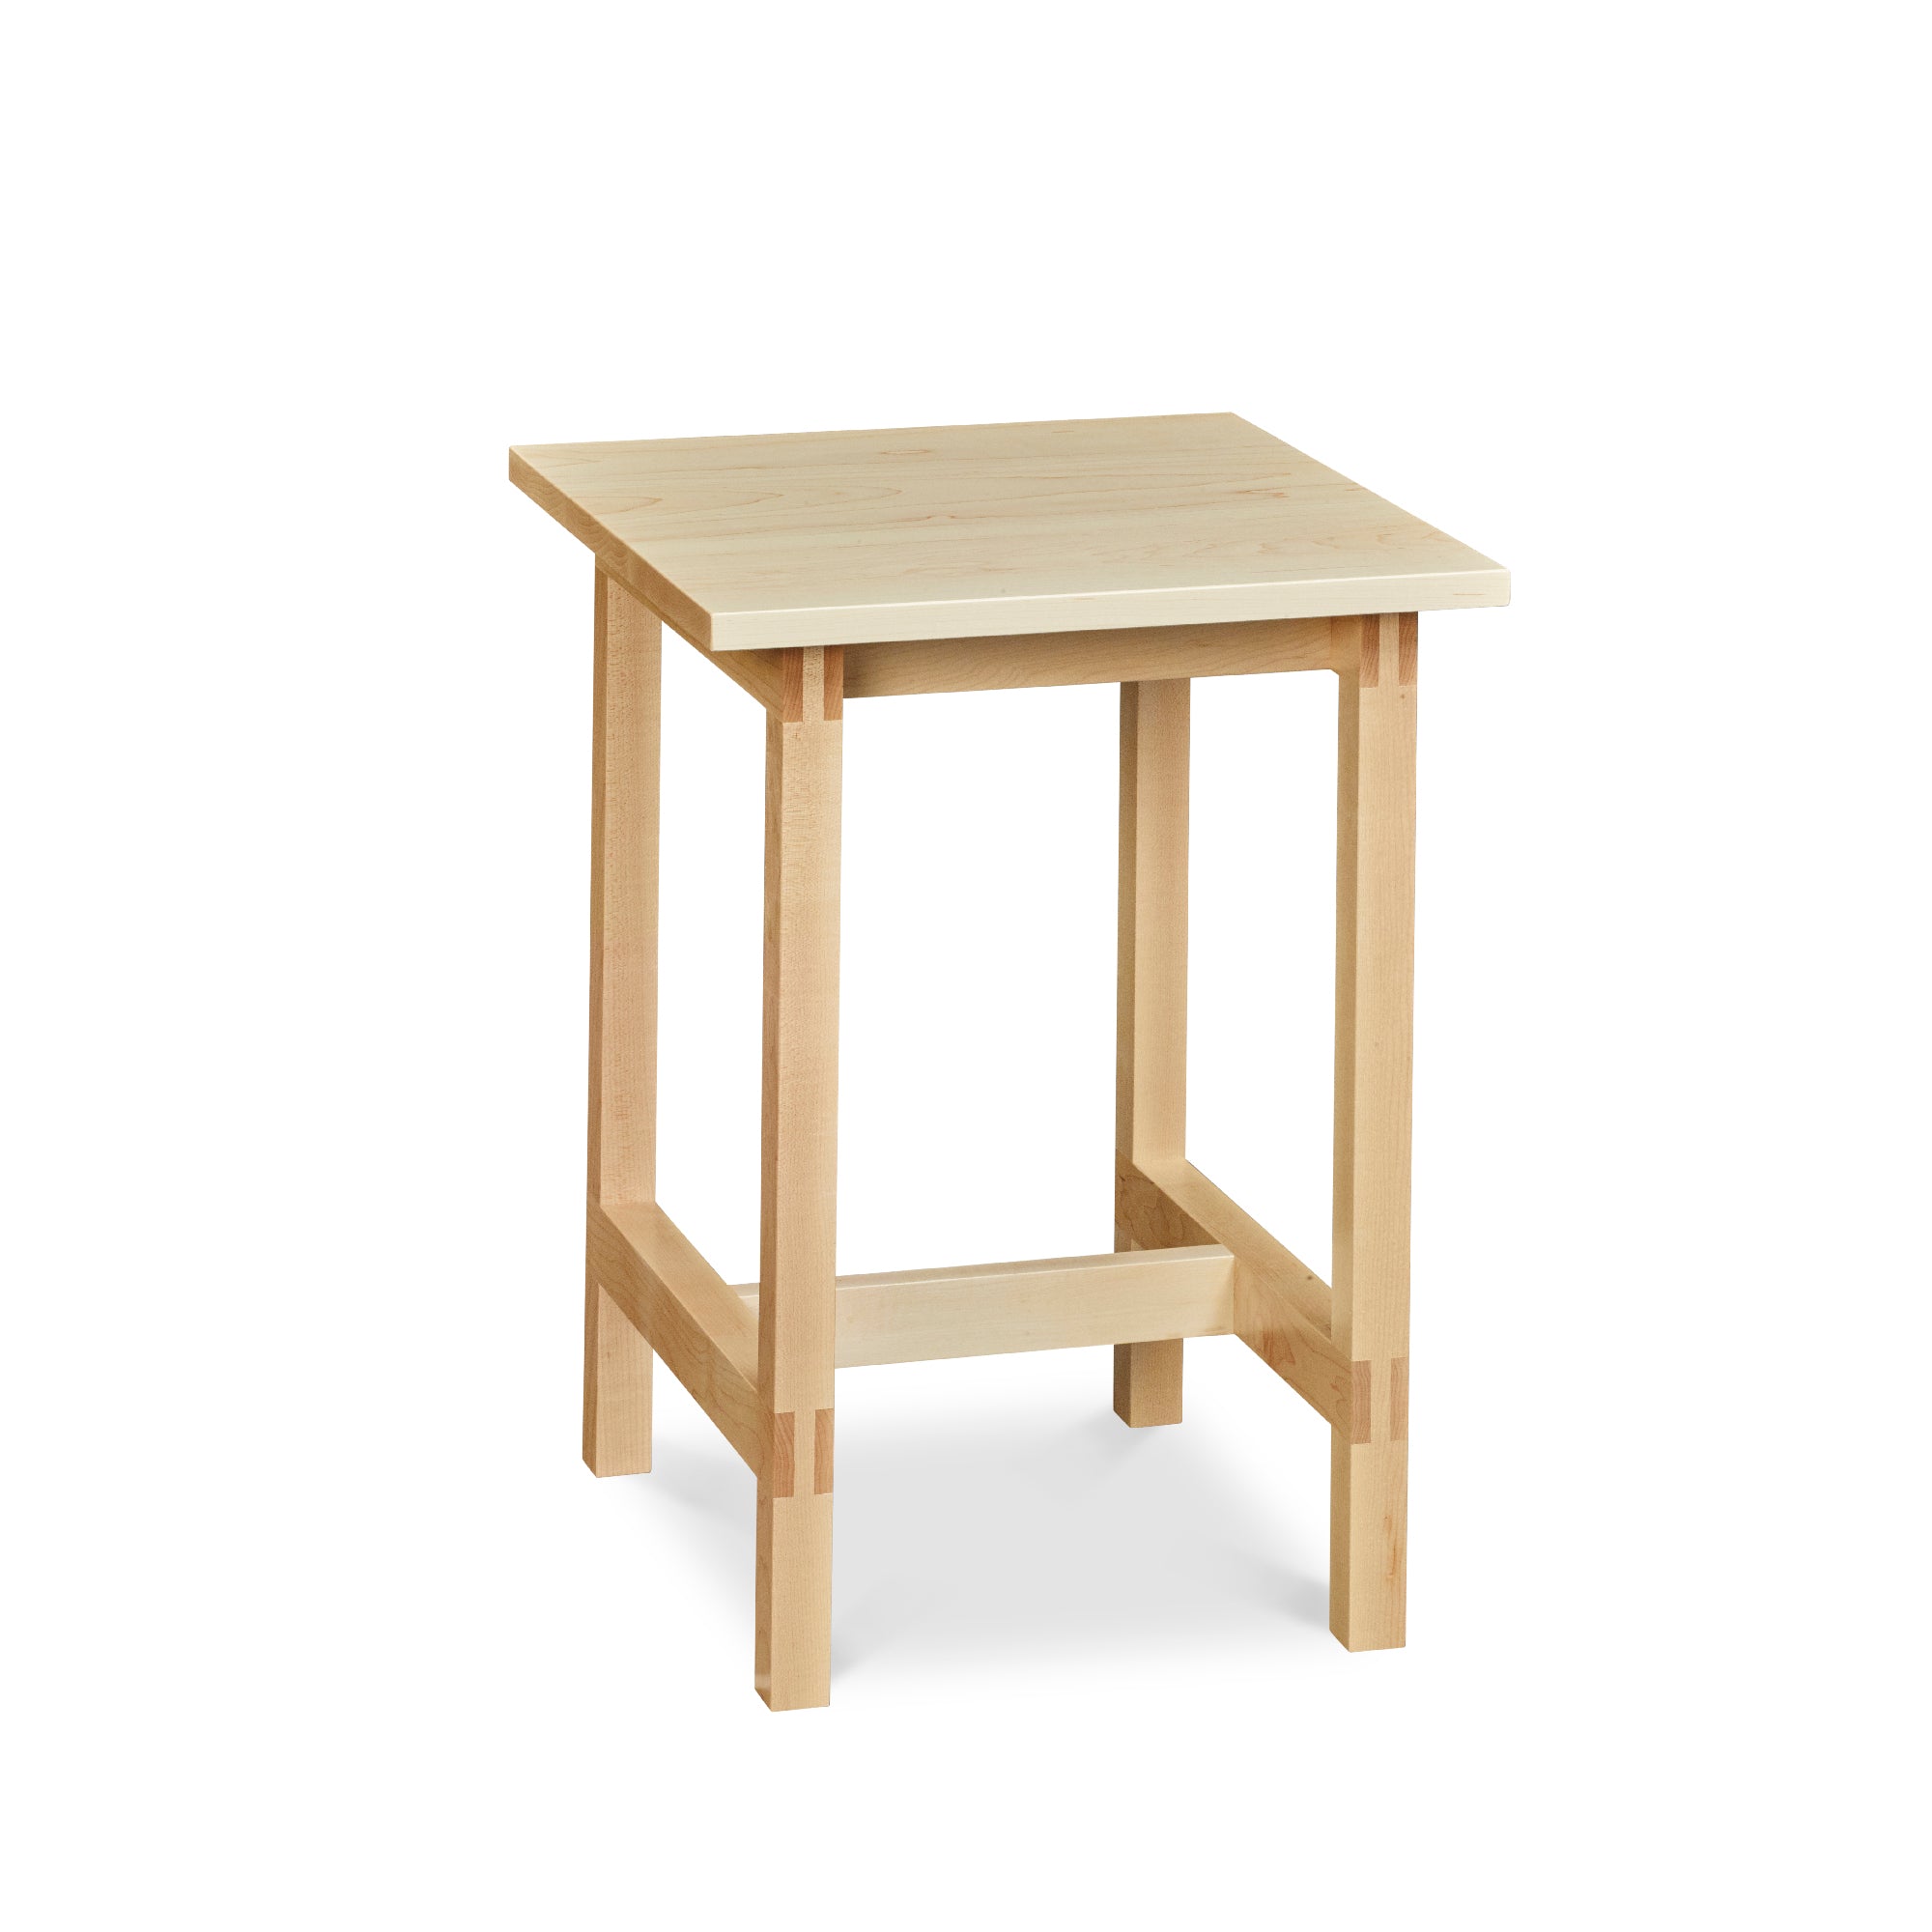 Modern trestle-style side table with visible joinery in maple, from Maine's Chilton Furniture Co.